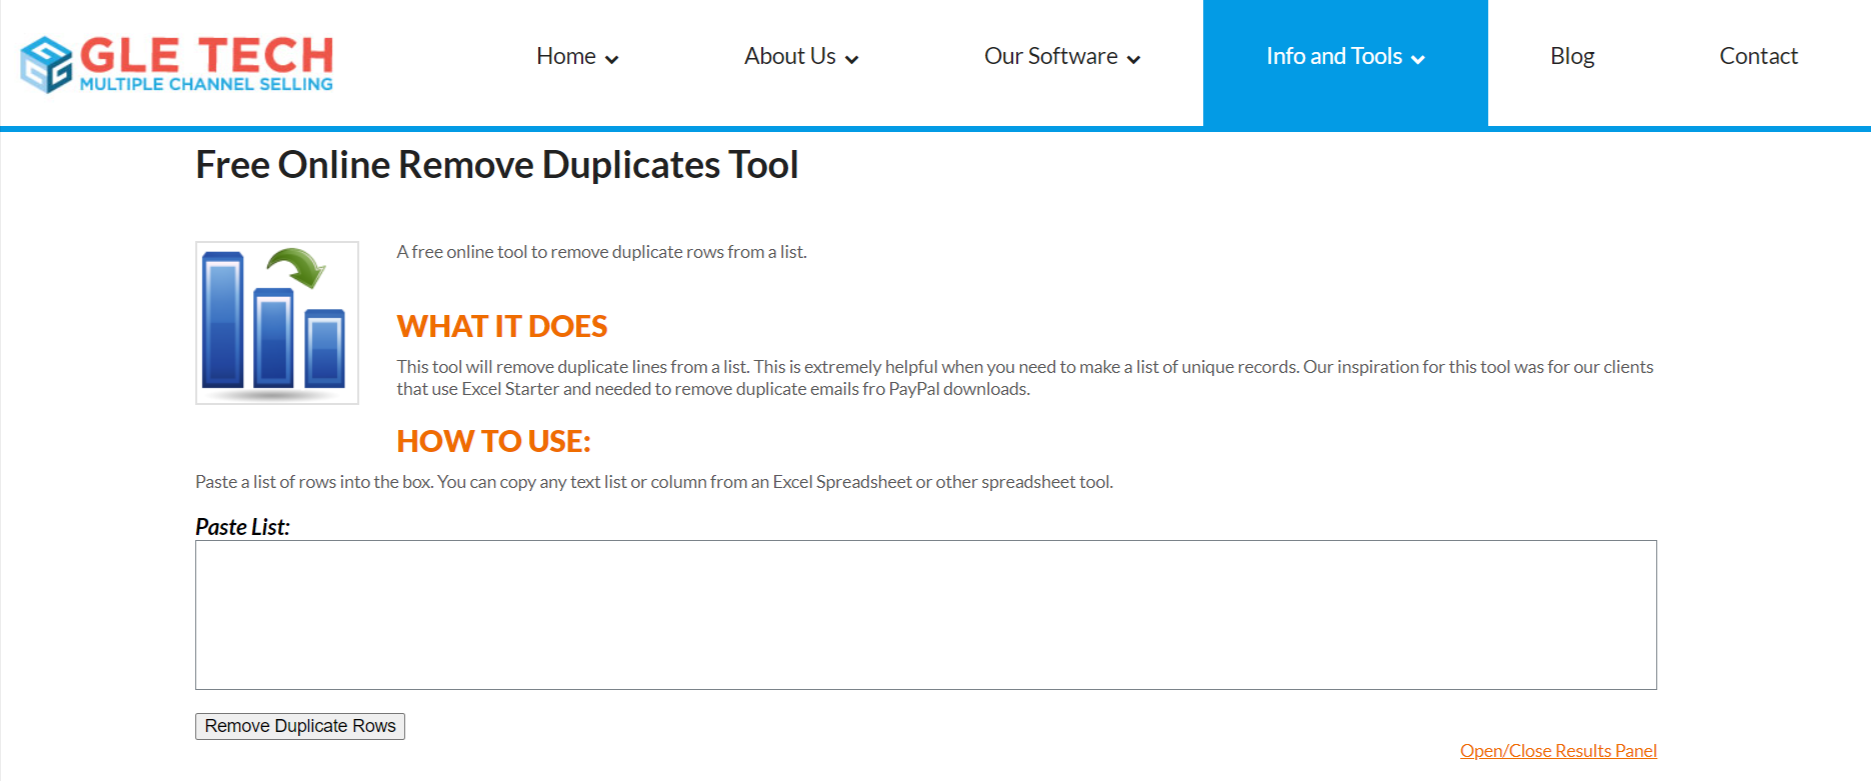 GLE TECH Online Duplicate Remover